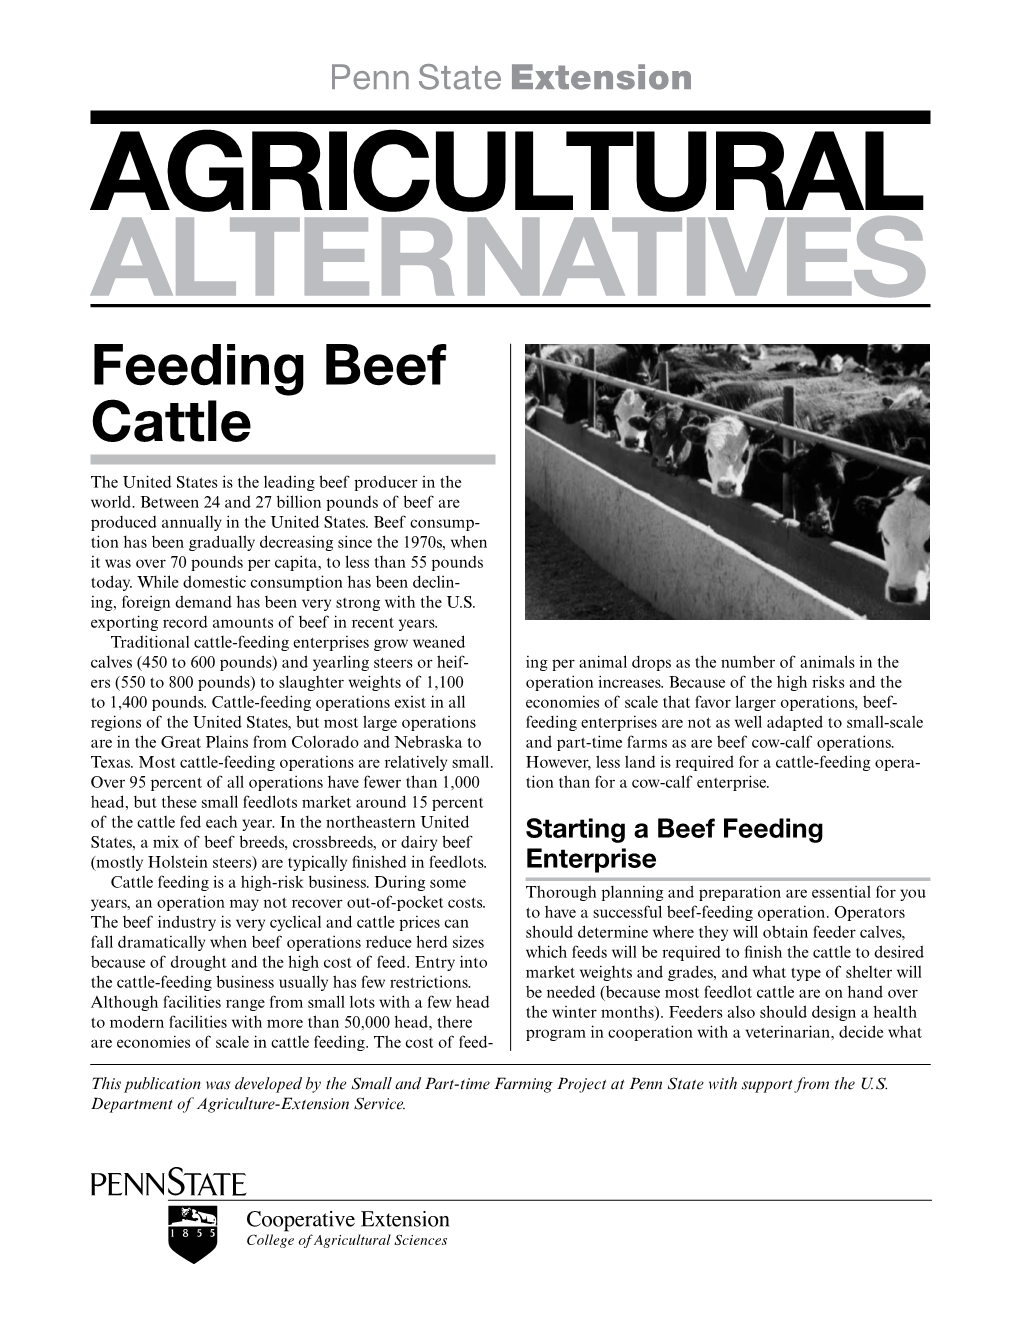 AGRICULTURAL ALTERNATIVES Feeding Beef Cattle